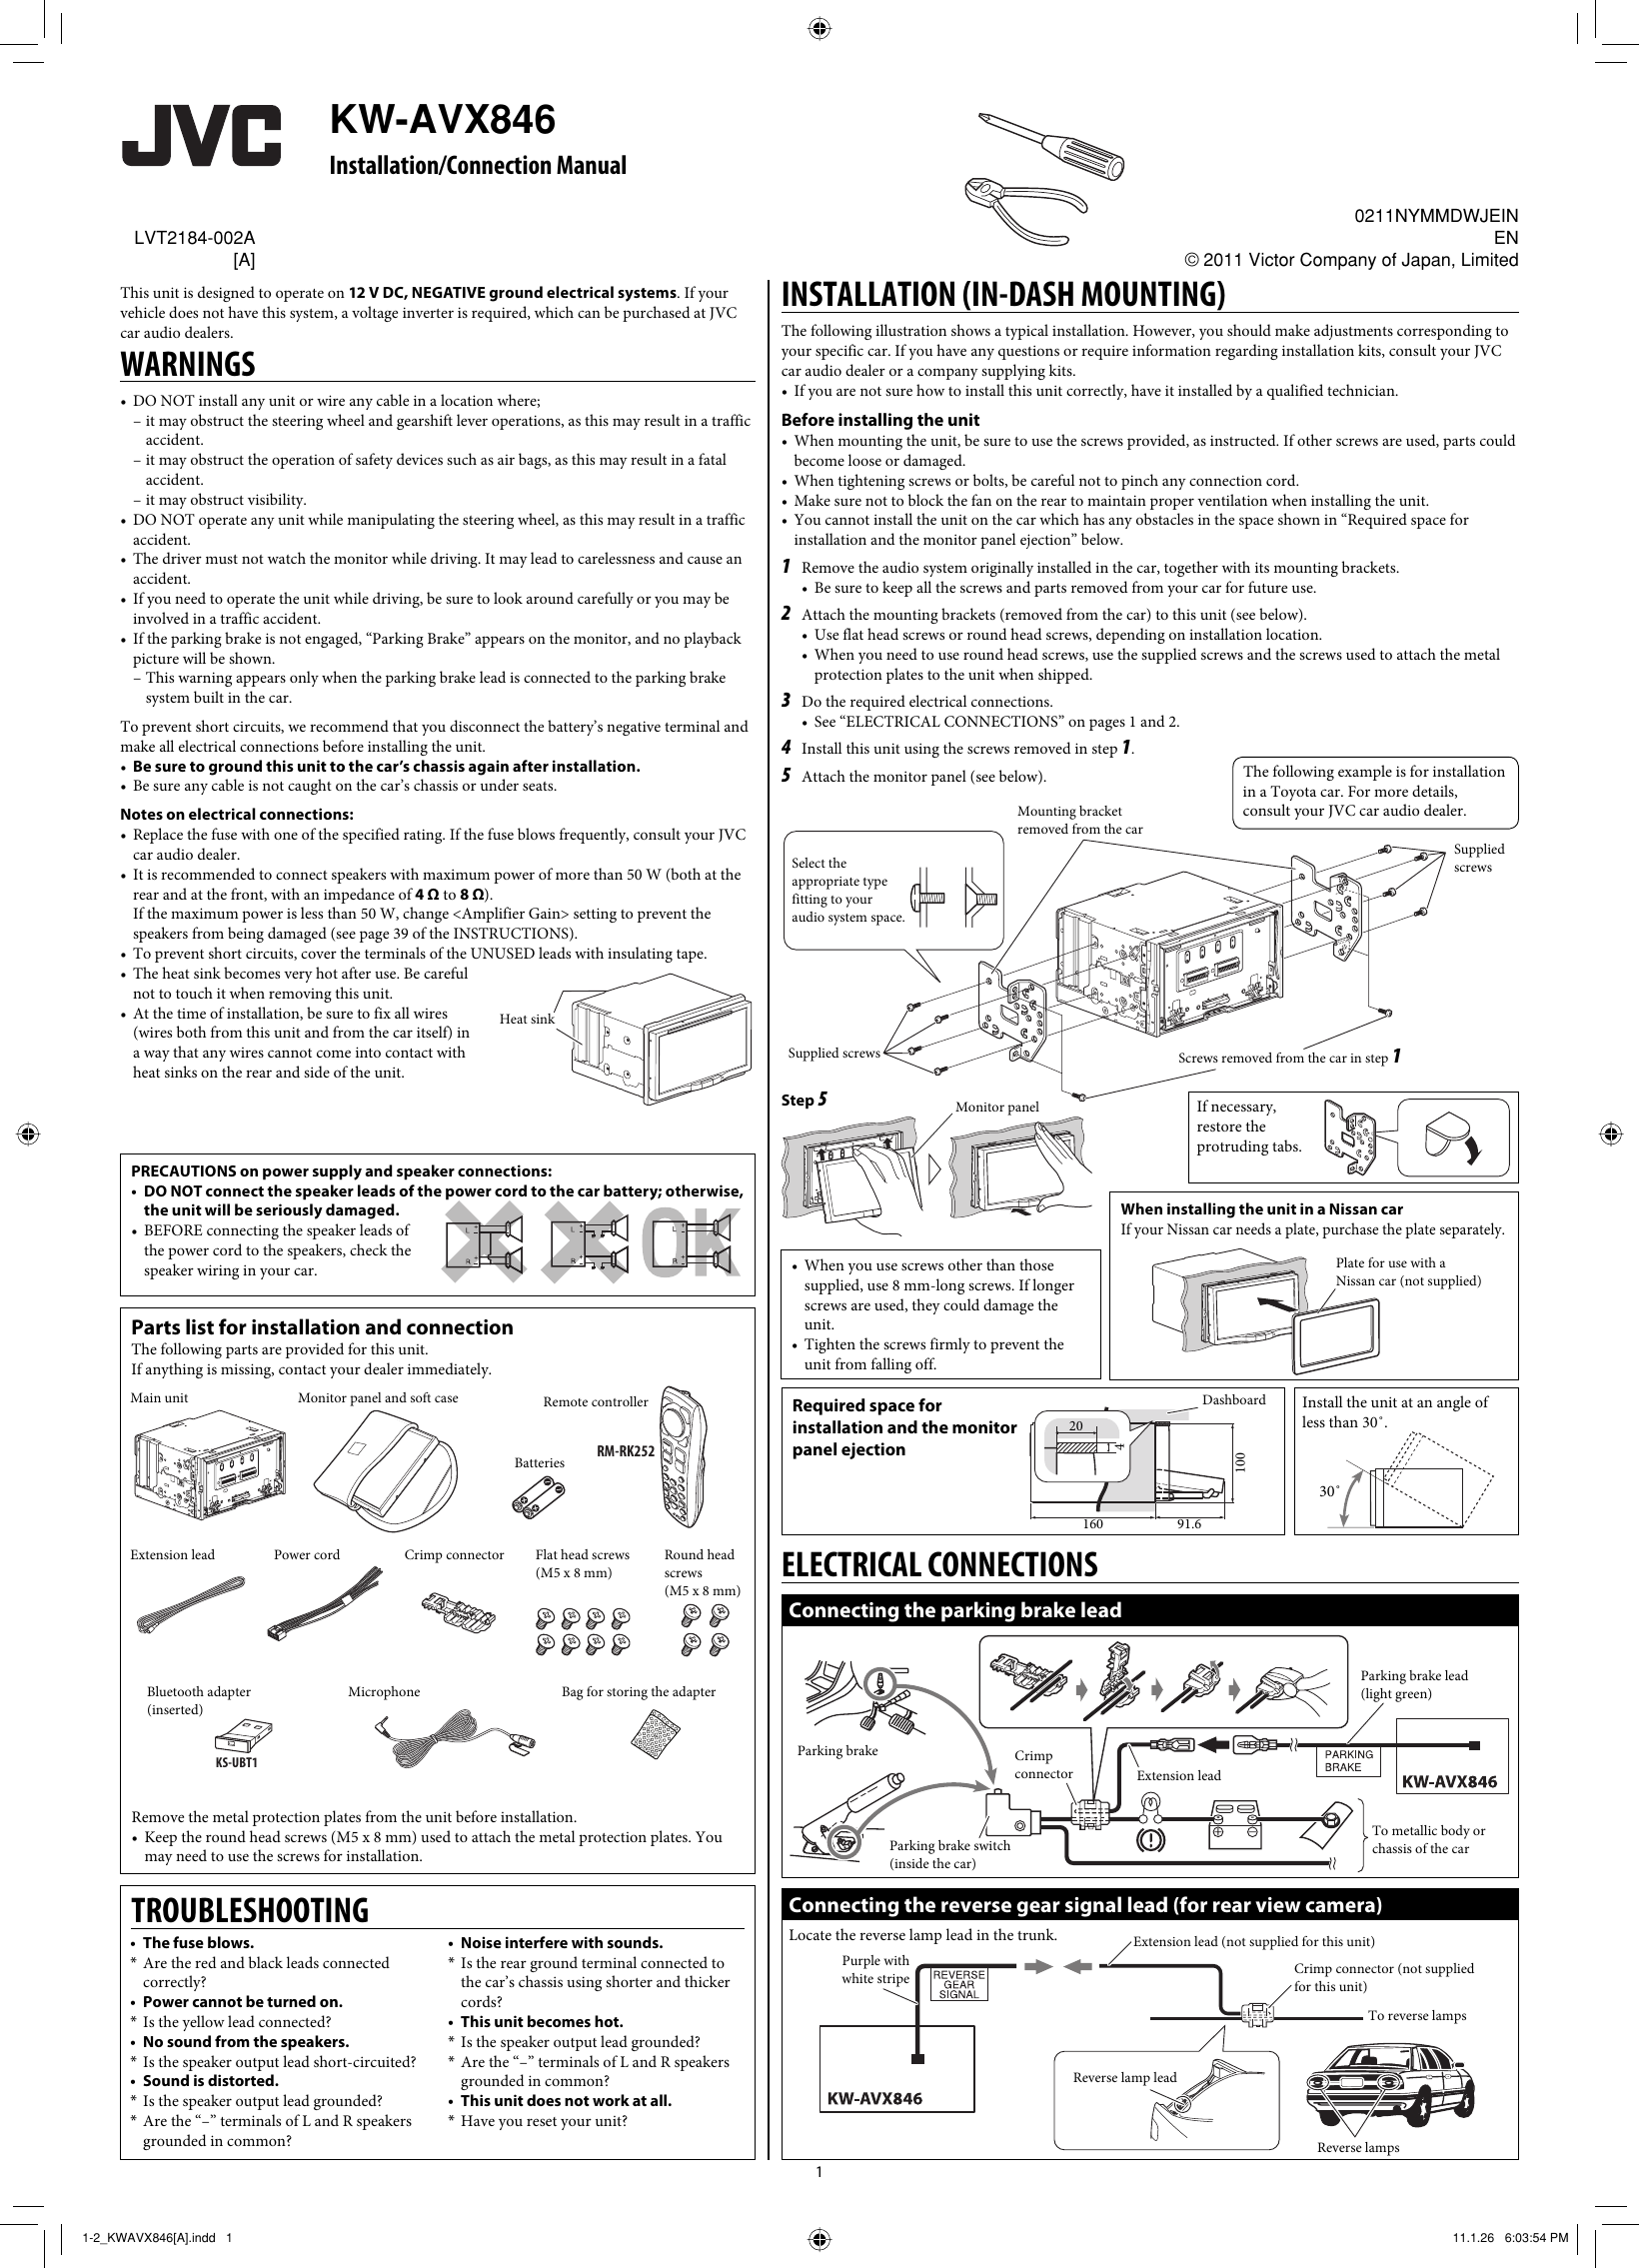 Page 1 of 2 - JVC KW-AVX846A KW-AVX846[A] User Manual LVT2184-002A